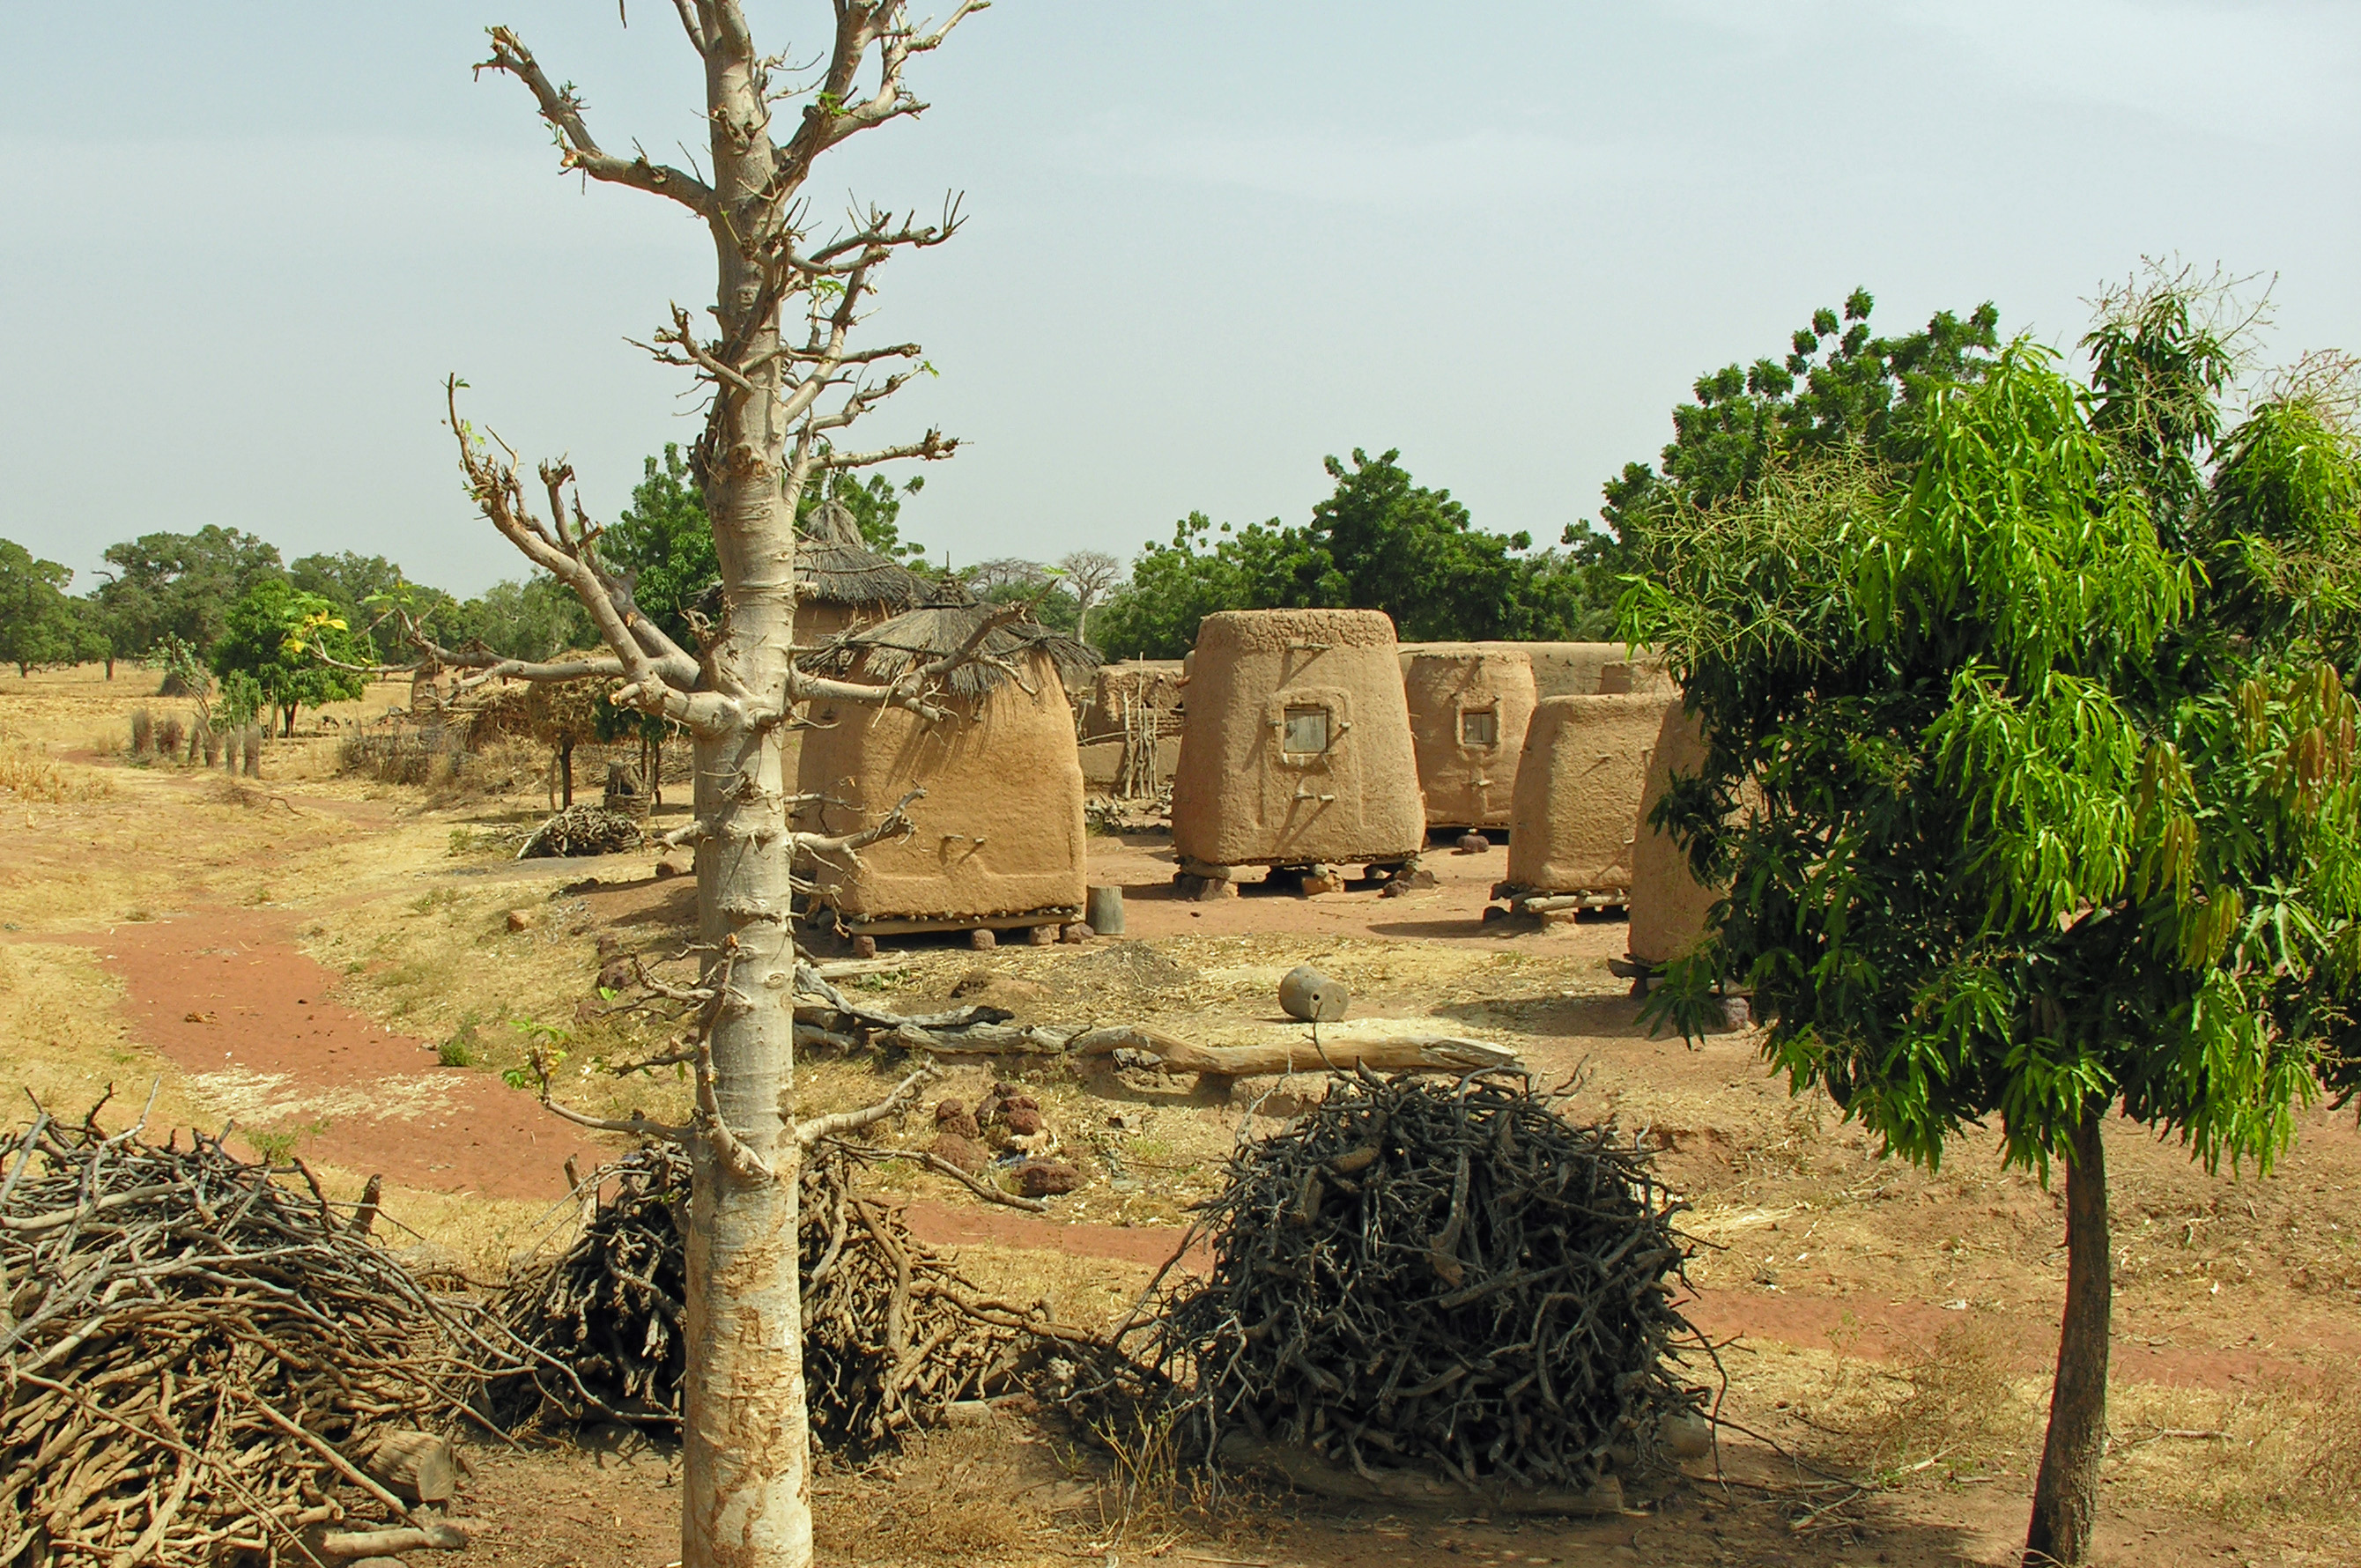 Traditional mud-bricked granaries in Mali are used to store cereals between harvests. They are built above the ground to protect the grain from rodents and damp, and sometimes have finely decorated doors. Photo: Courtesy of AKDN